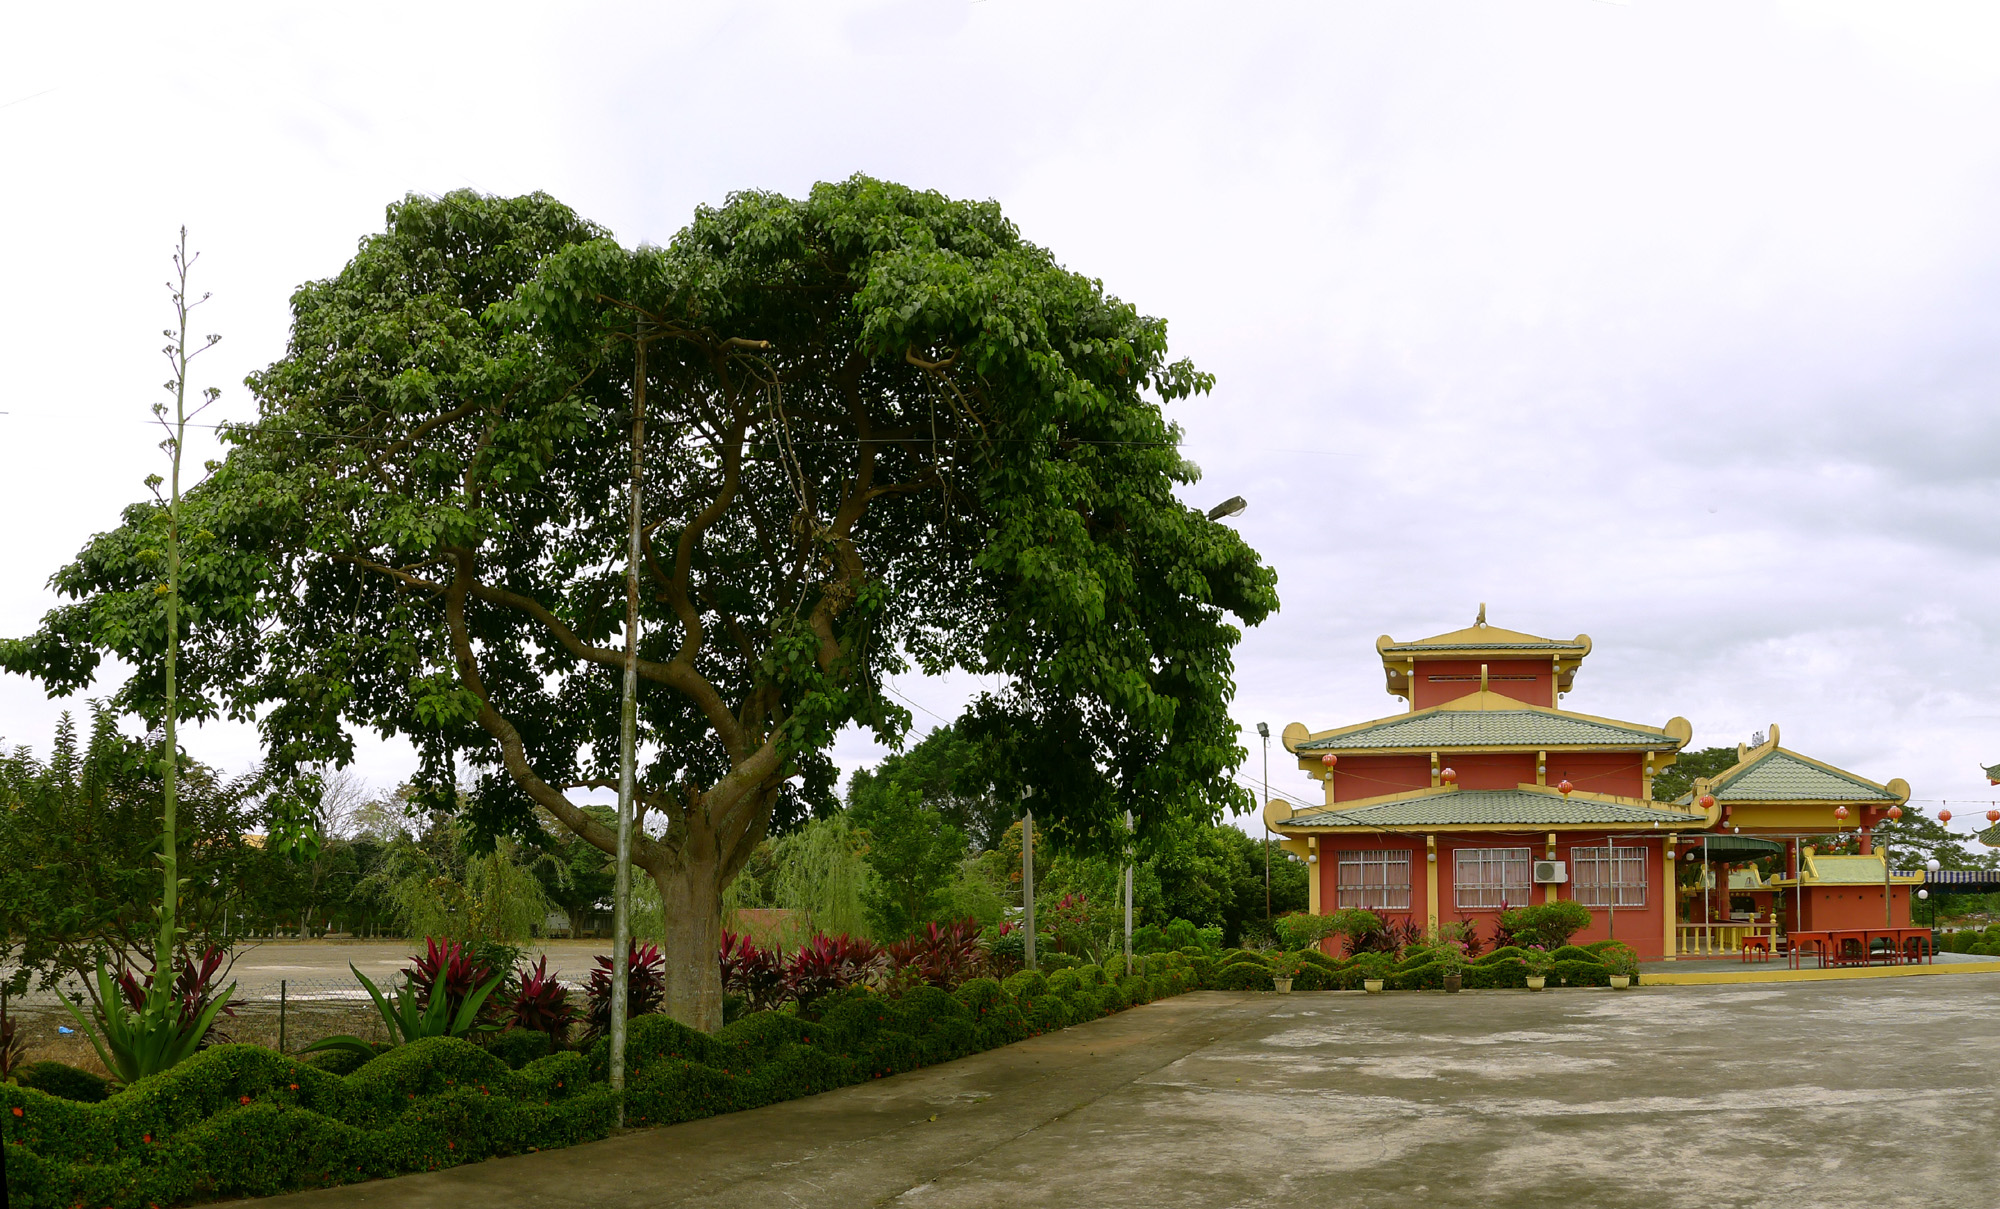 Budhi tree at Temple of the Eight Immortals in Tawau